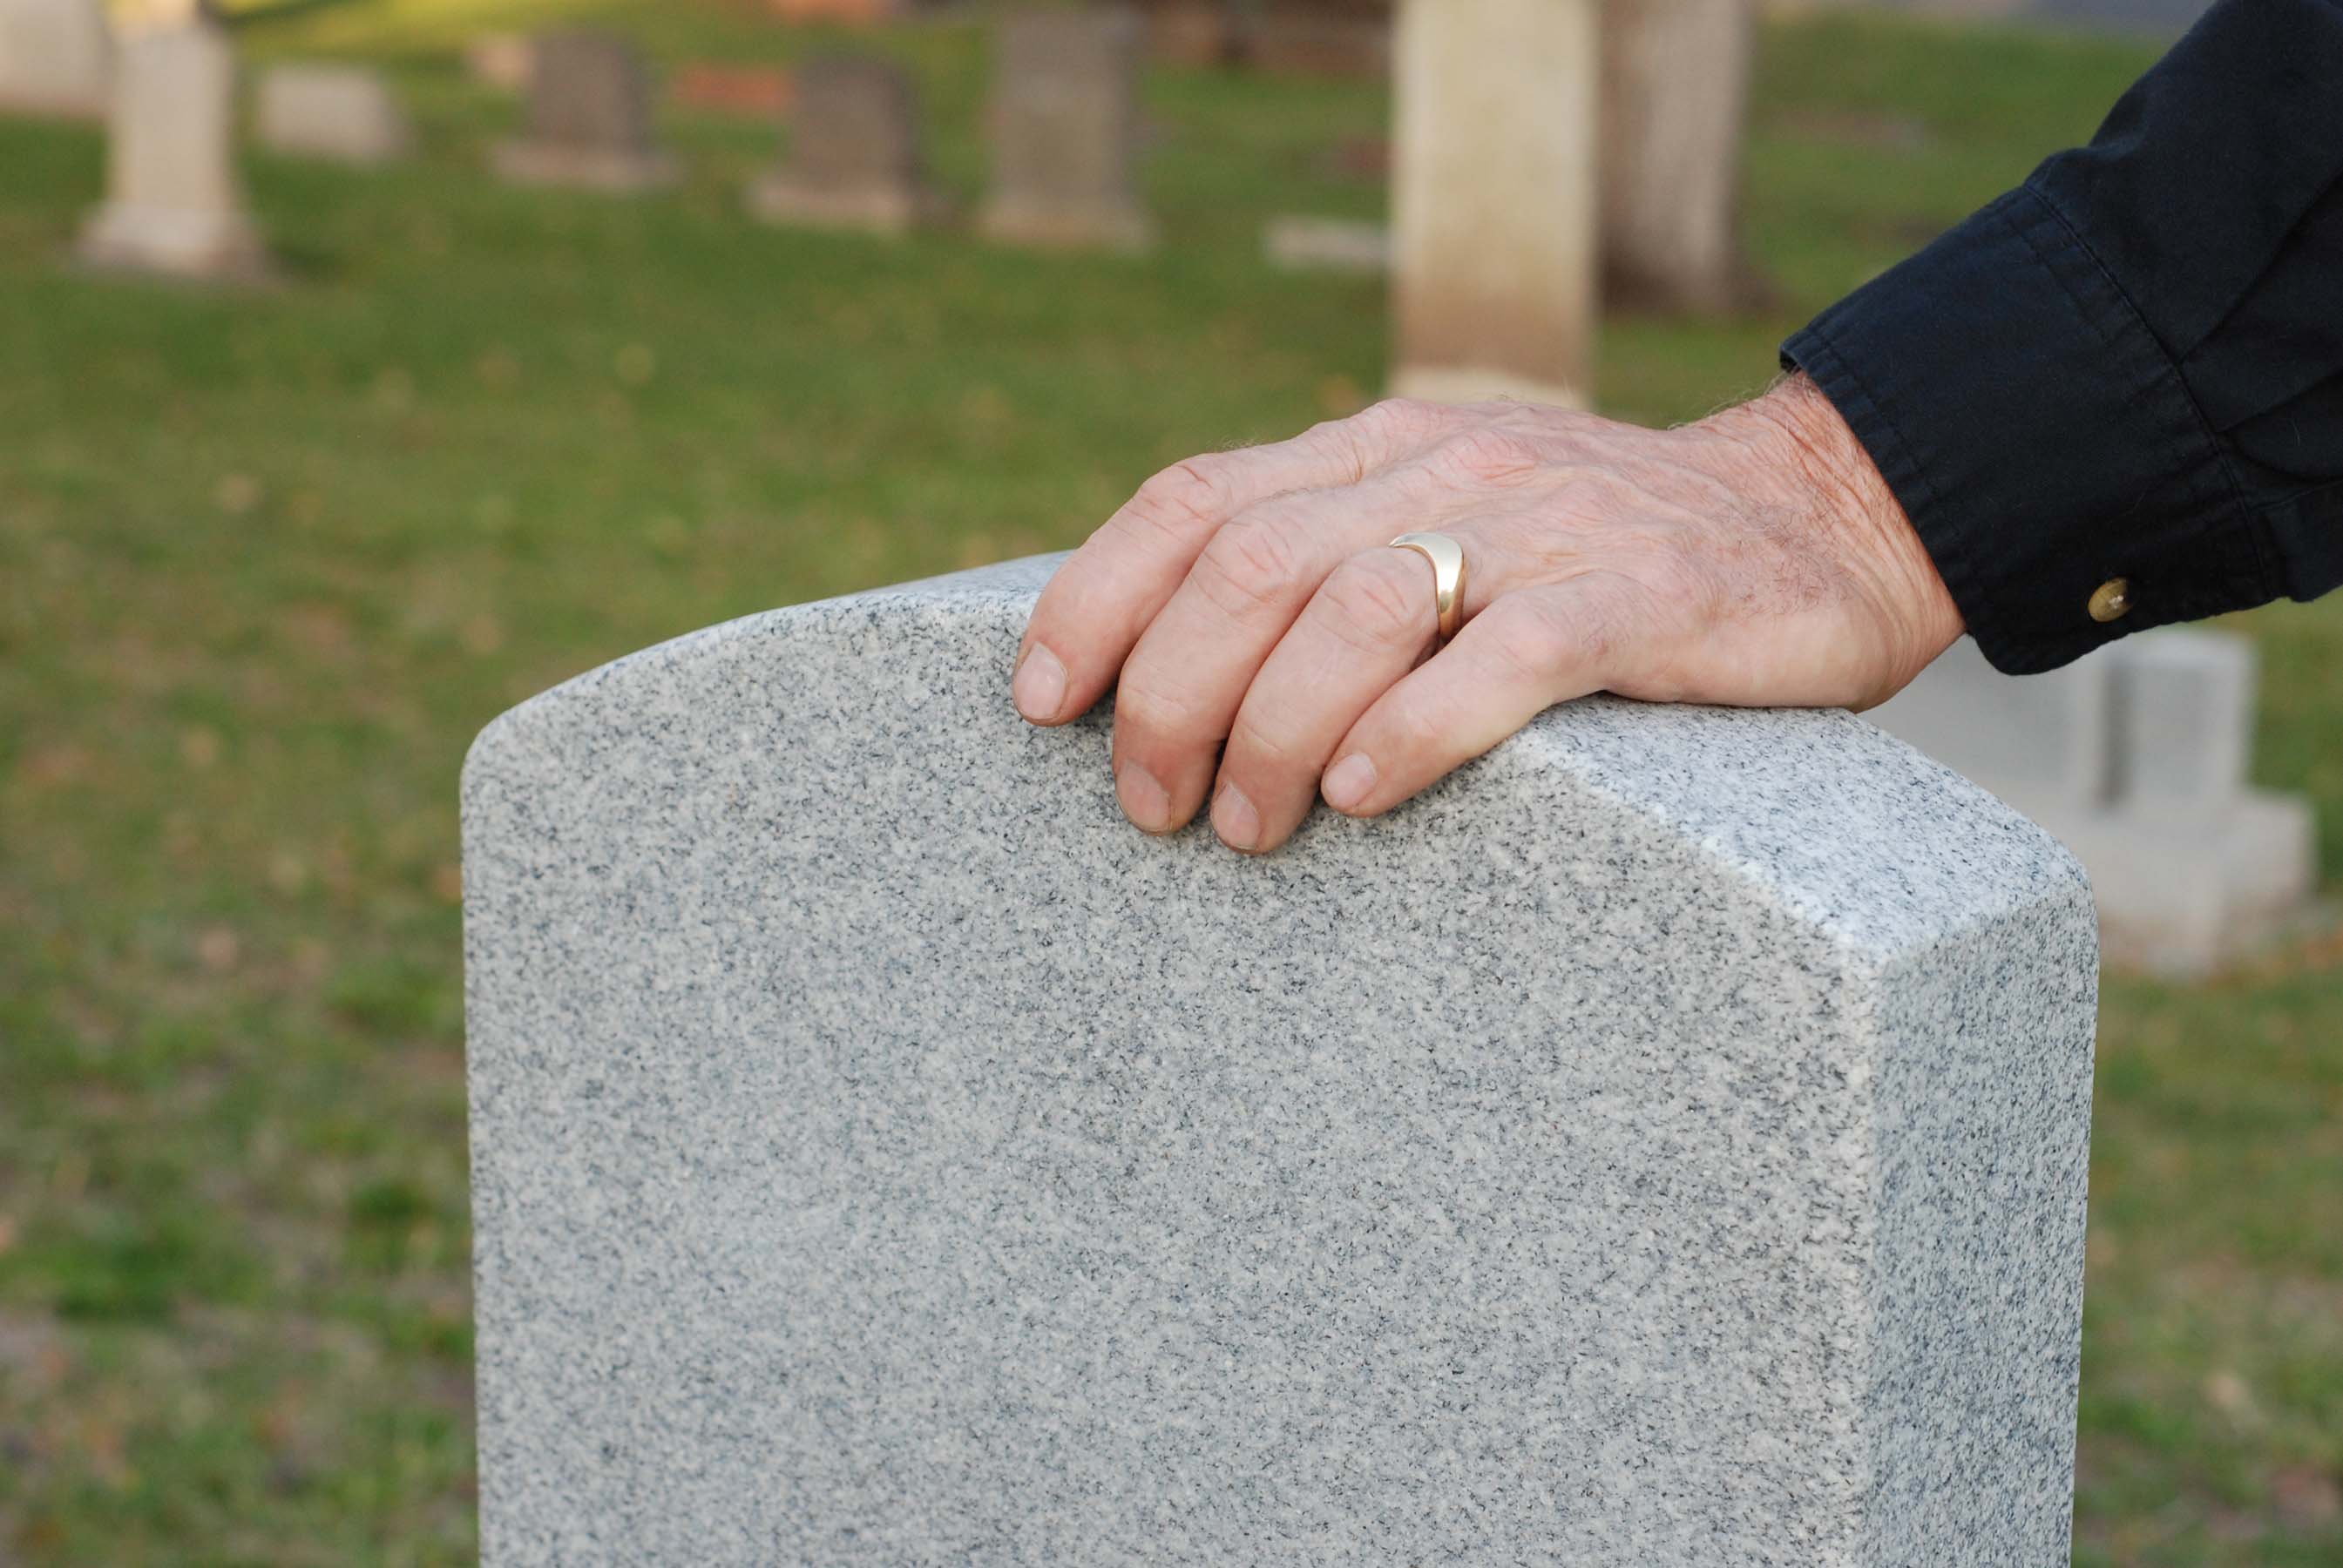 A man's hand resting on a gravestone